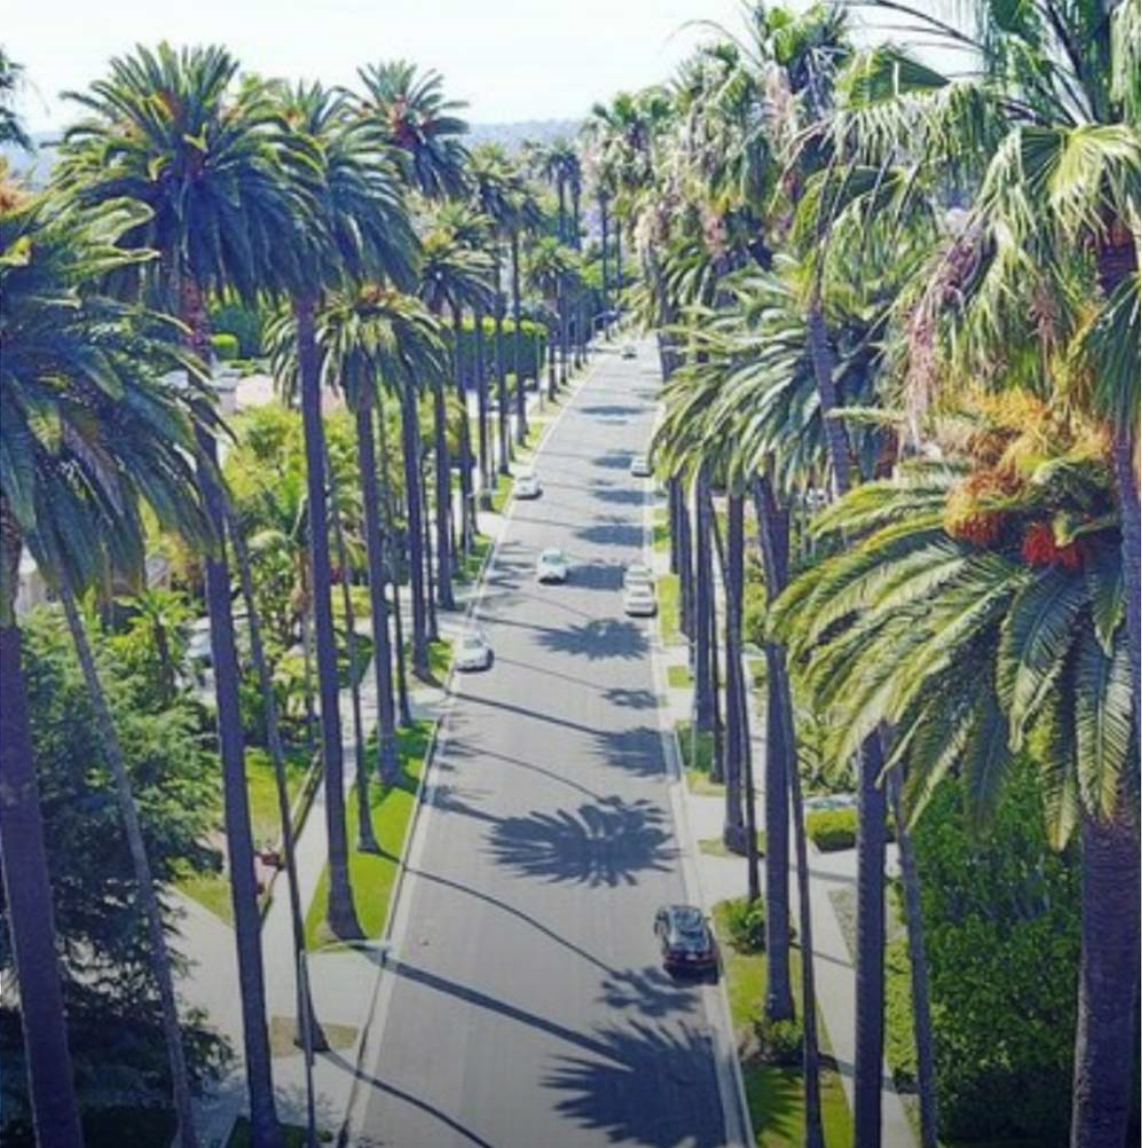 An aerial view of a street in Beverly Hills, CA. Instagram photo by @jennifer.knaeble.